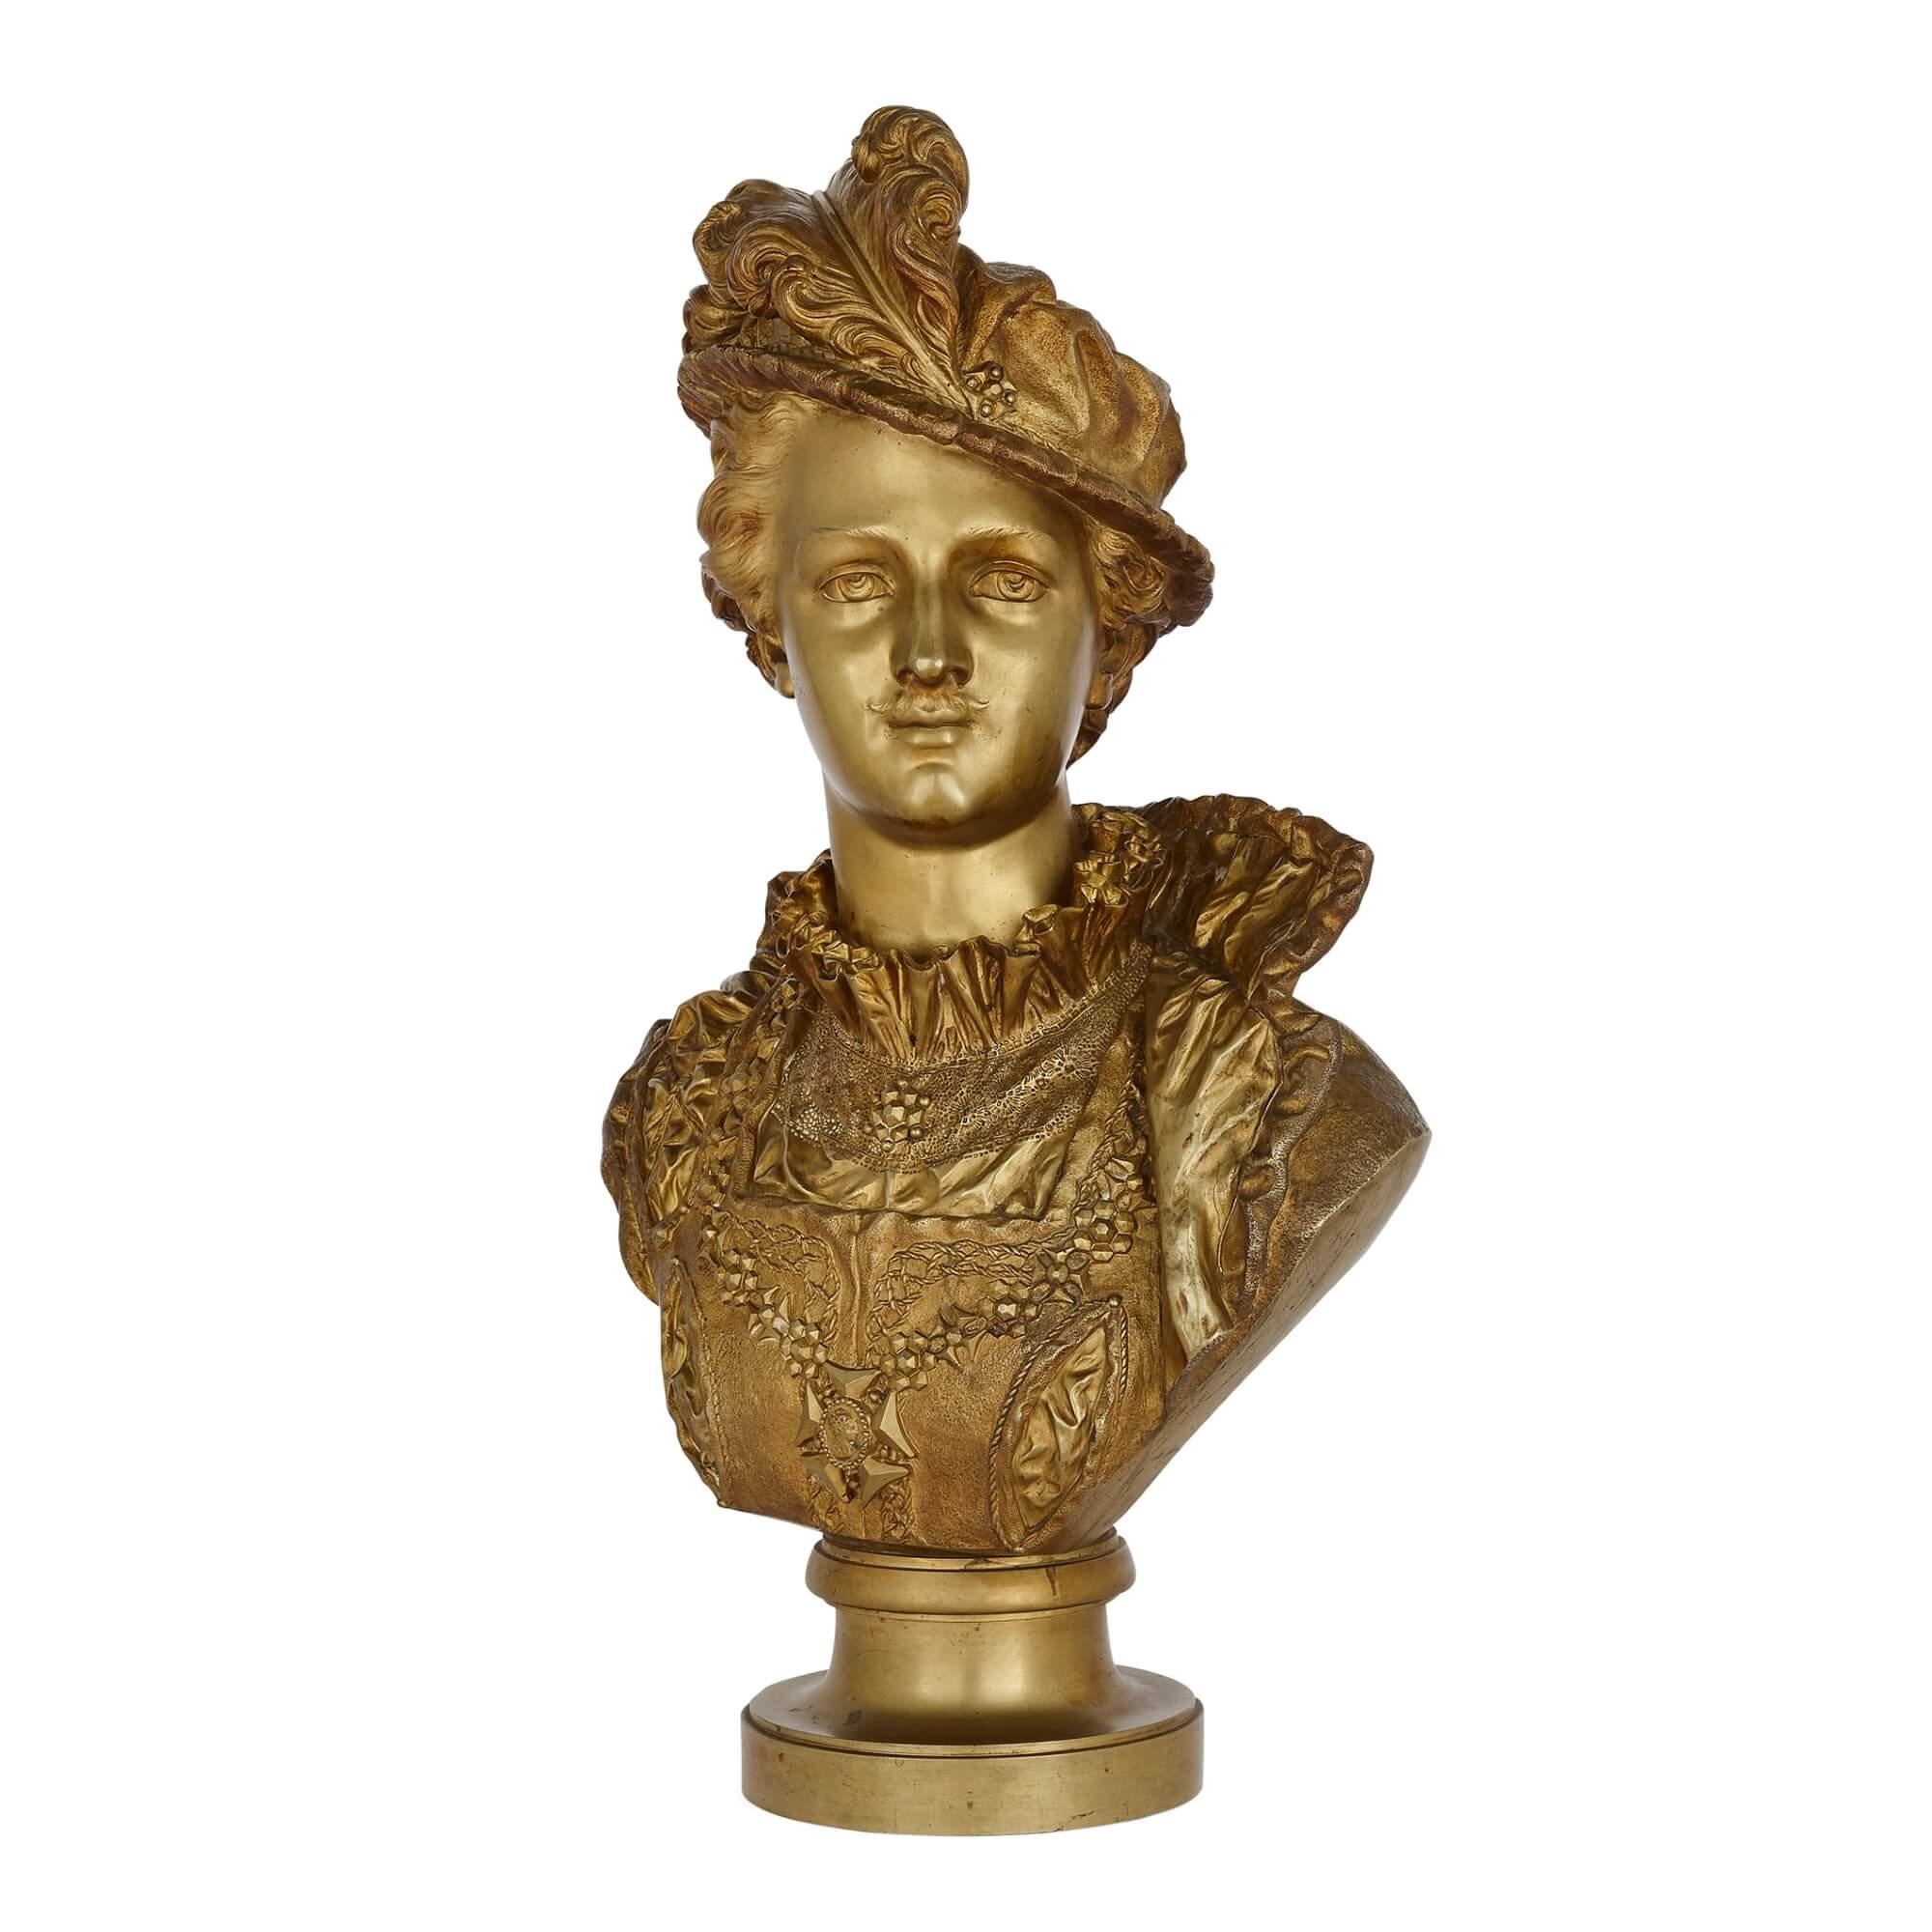 An Ormolu bust of a 16th century Prince, by Rancoulet
French, Late 19th Century
Height 72cm, width 42cm, depth 22cm

Made by the skilled and renowned French artist and sculptor Ernest Rancoulet, (French, 1870-1915), this excellent gilt-bronze